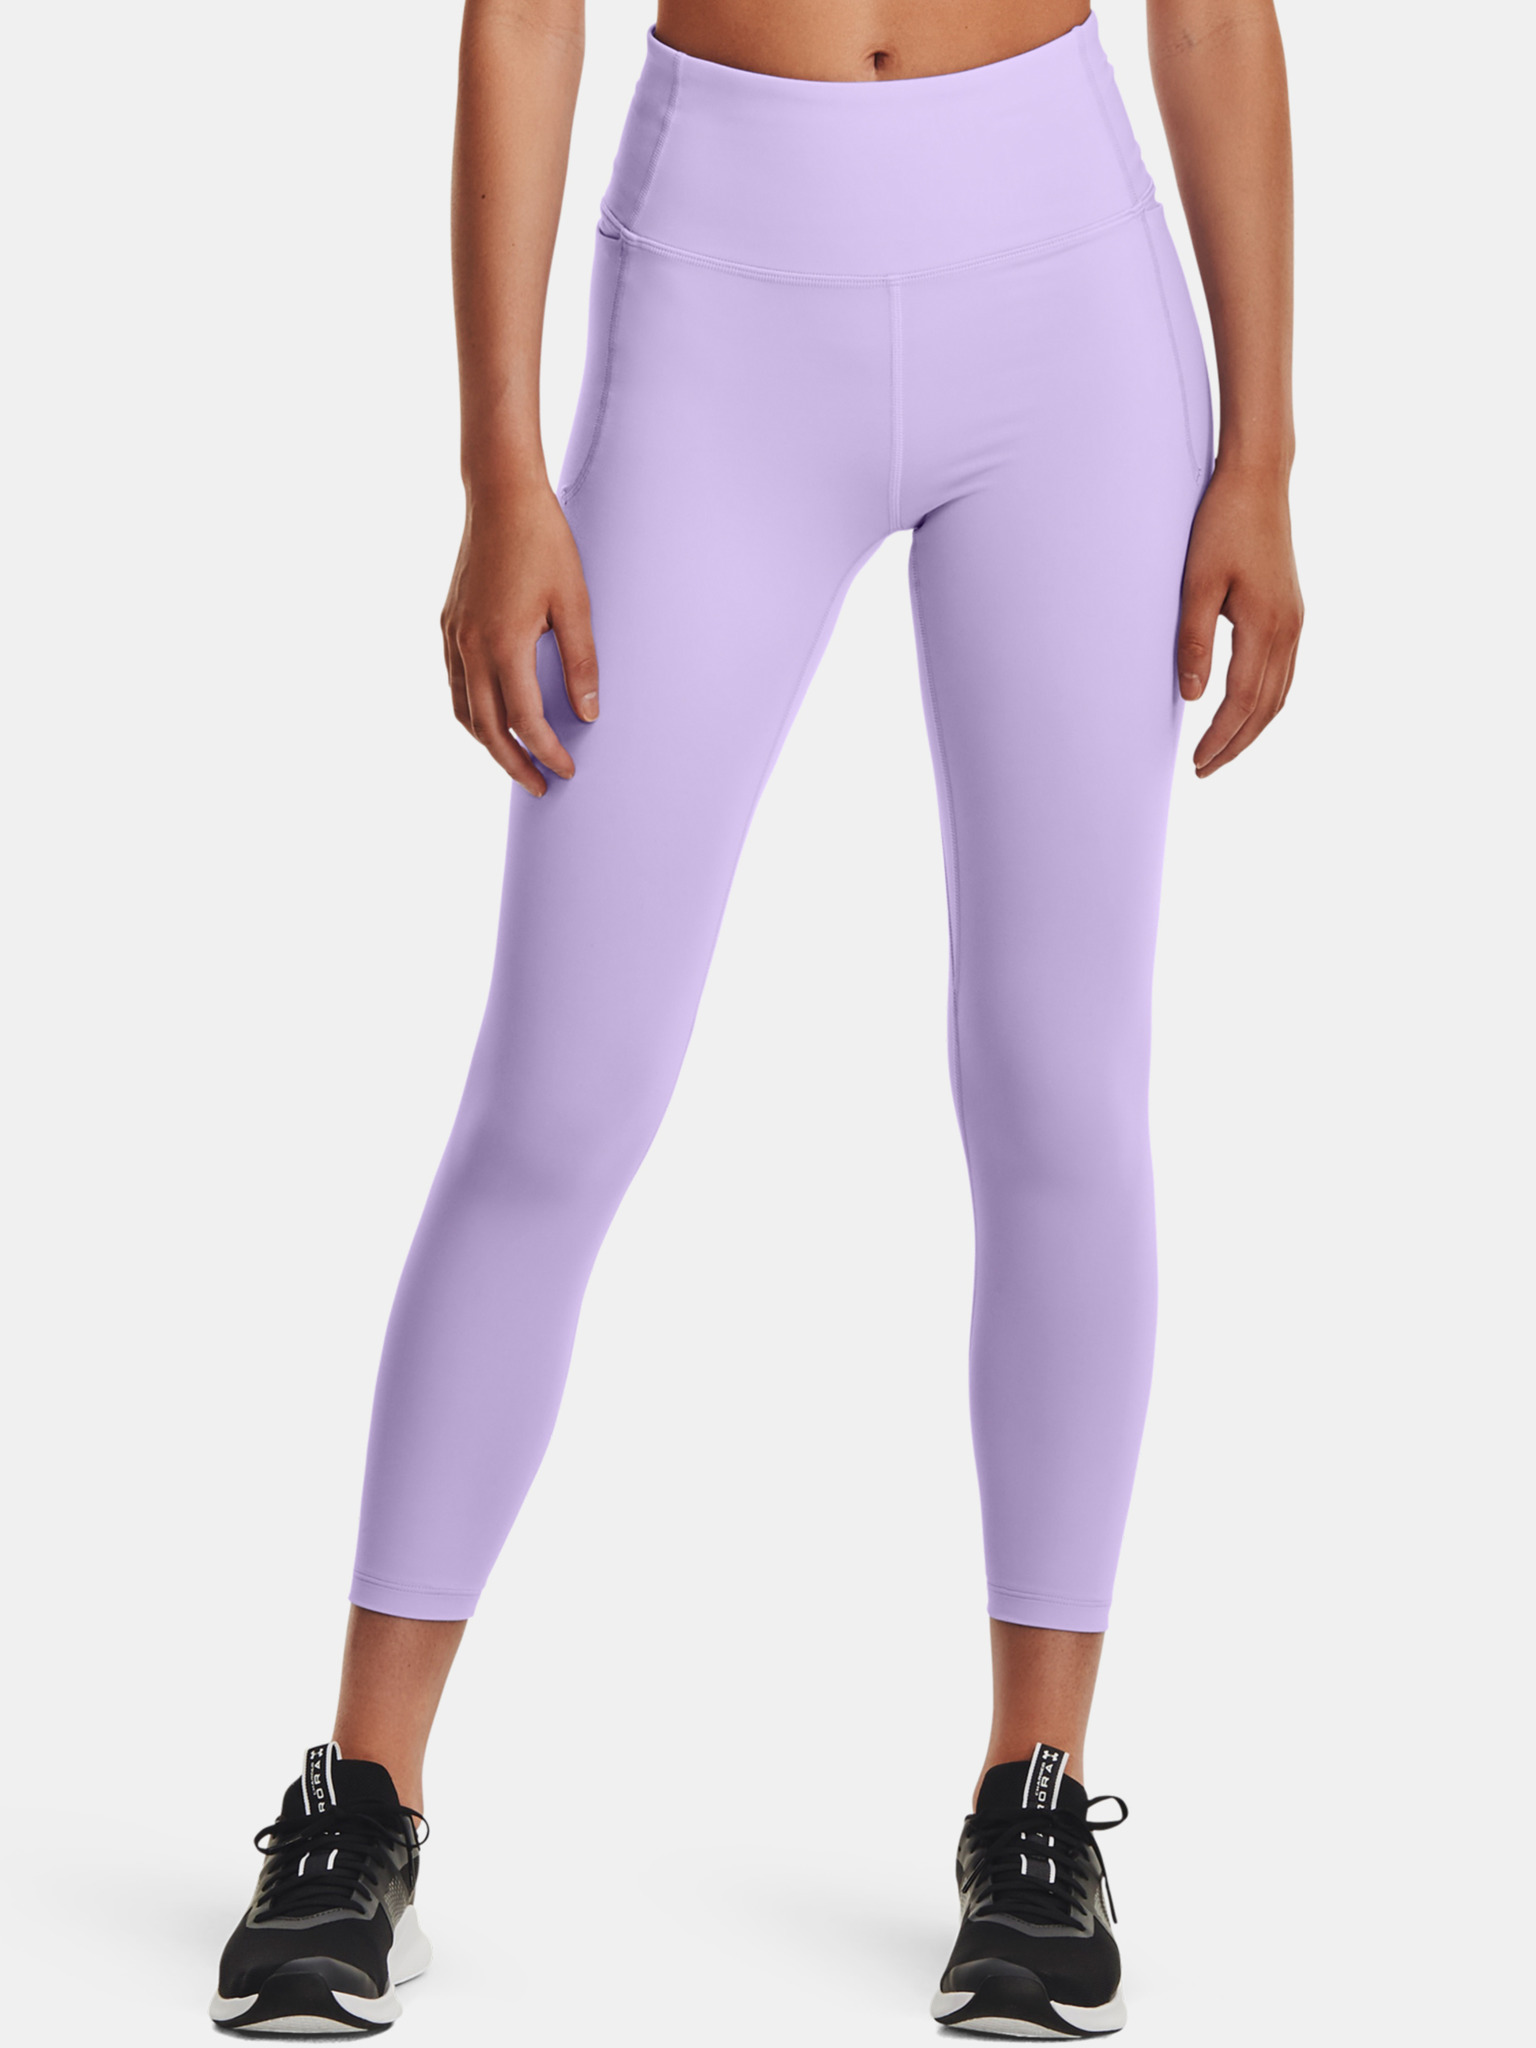 Under Armour, Meridian Leggings Womens, Performance Tights